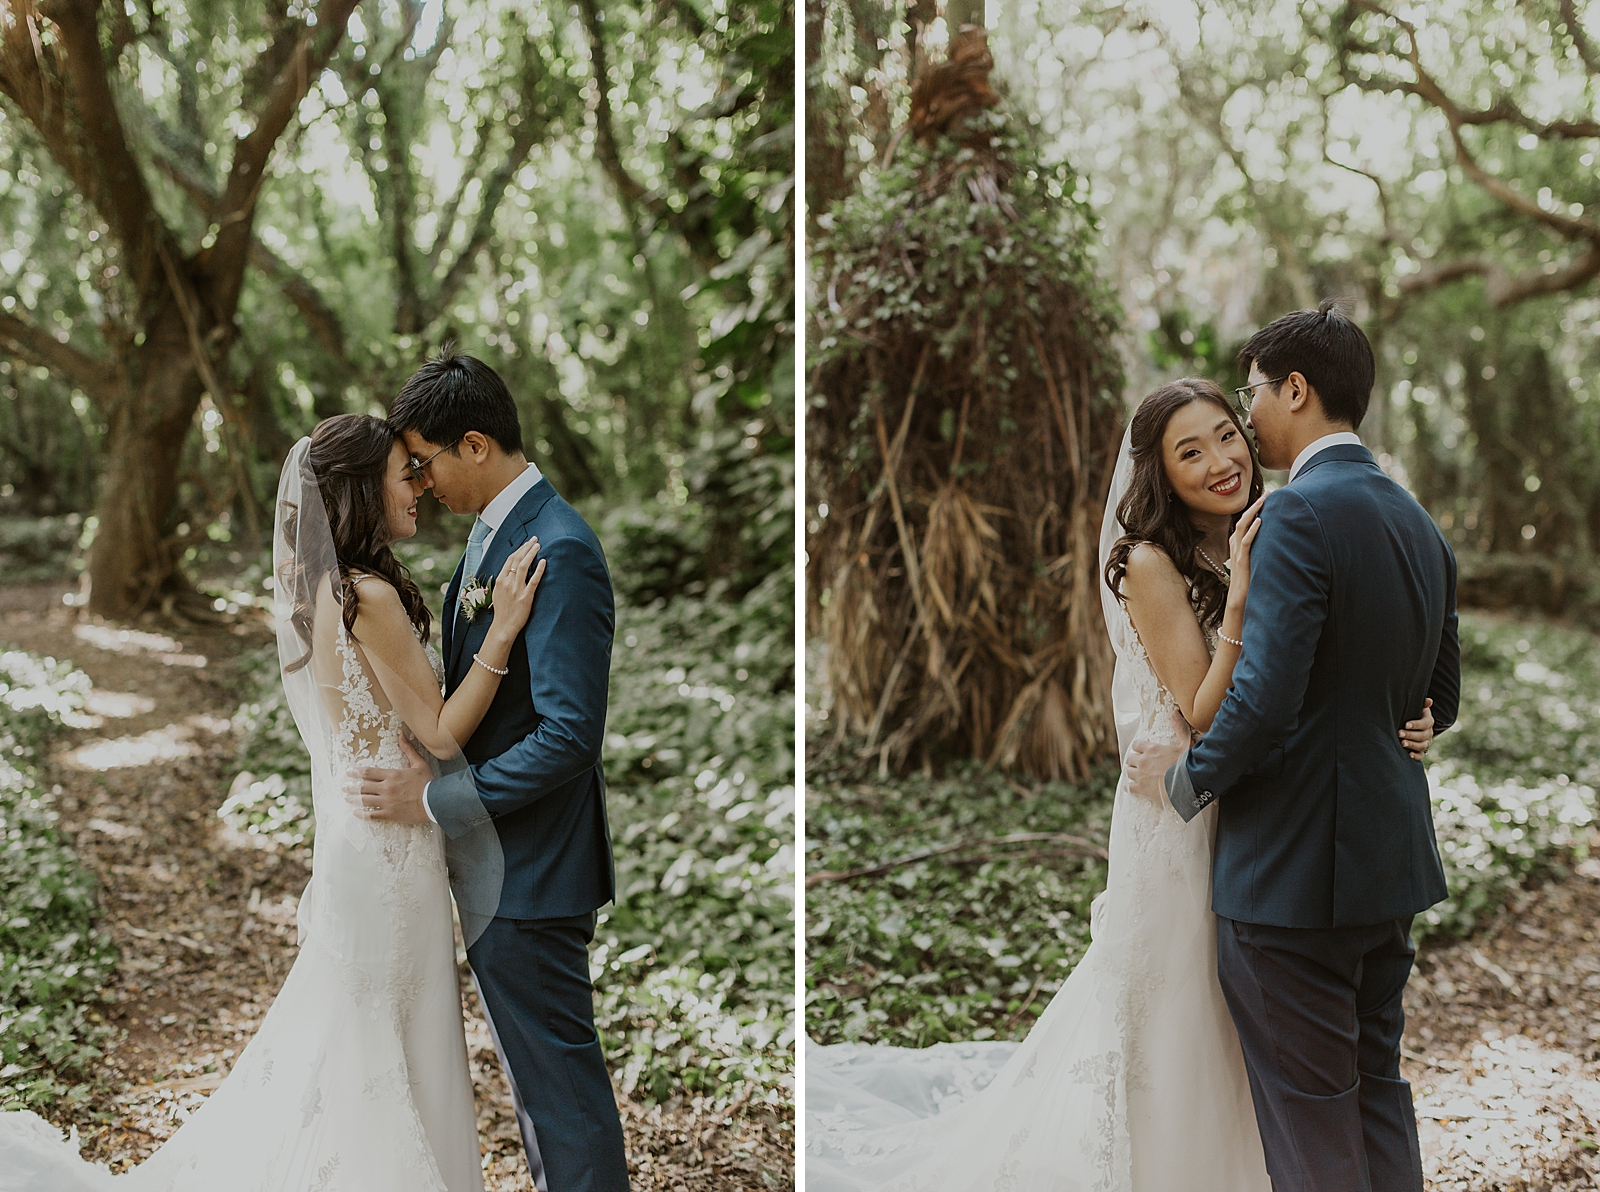 Bride and Groom resting their heads on each other surround by trees and greenery